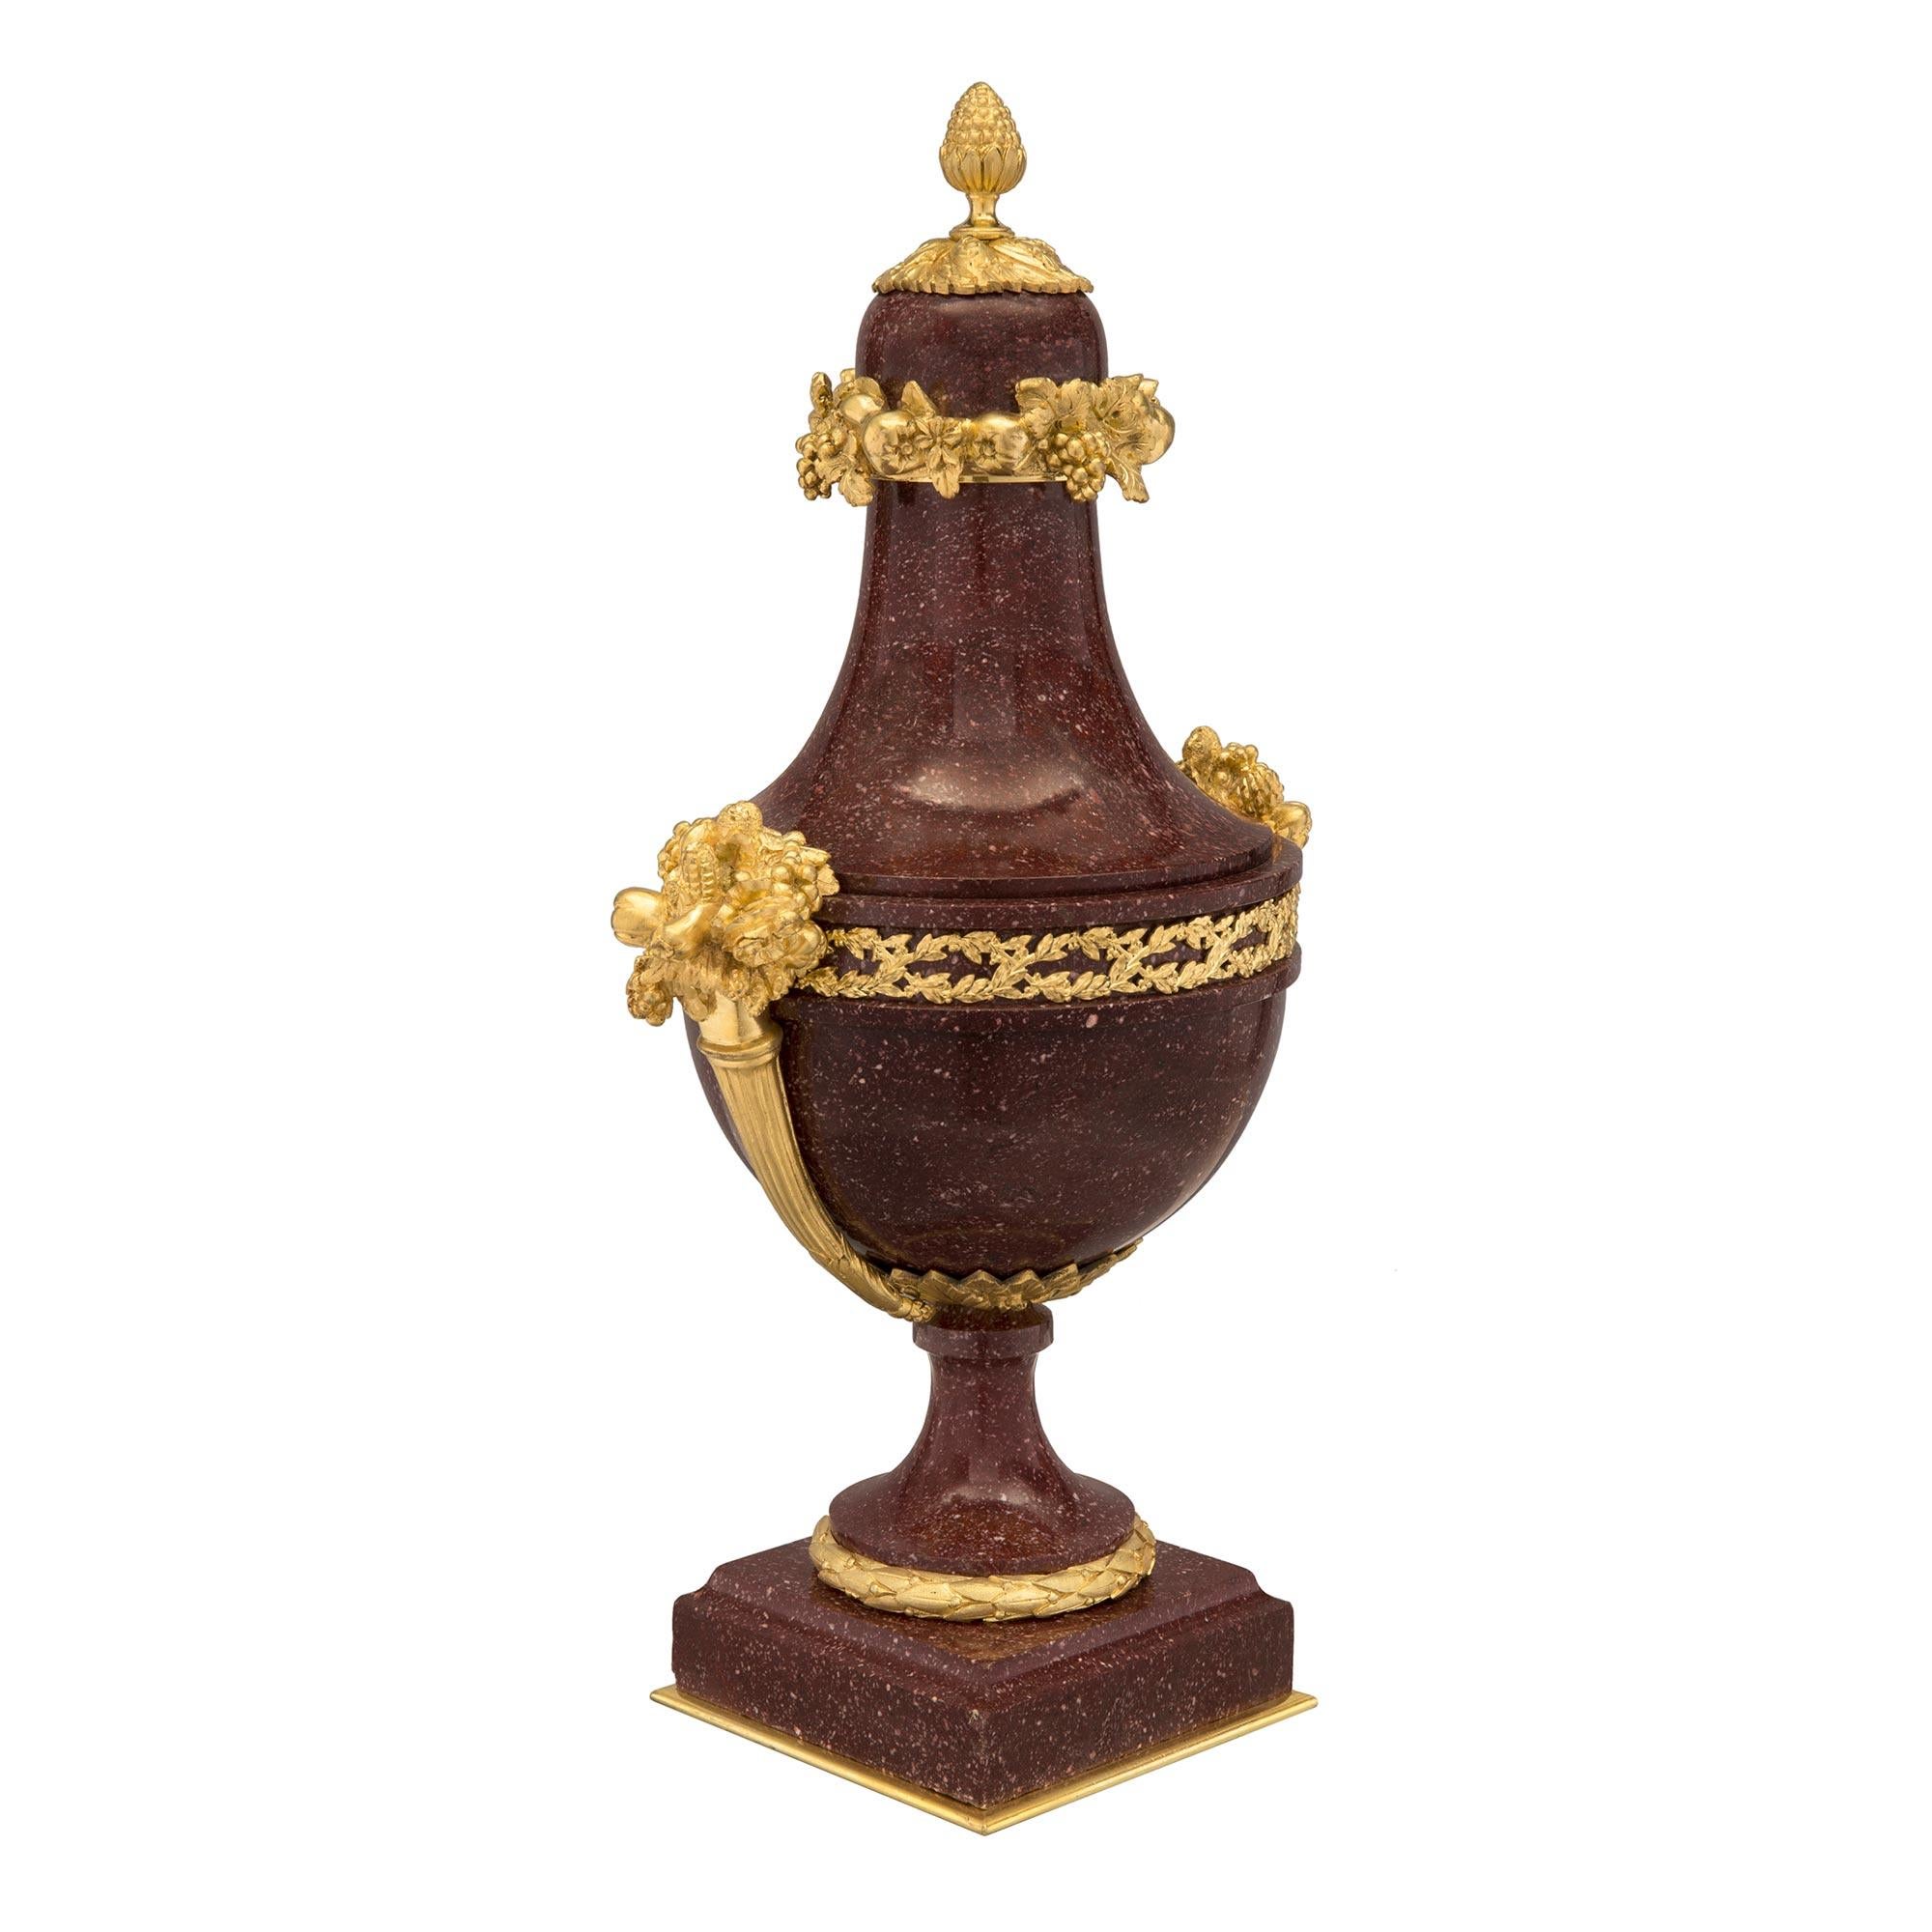 A sensational and high quality pair of French mid 19th century Louis XVI st. Porphyry and fire gilded ormolu lidded urns. The pair are raised by a square ormolu plate below the mottled square marble base. The socles are surrounded by a beaded laurel